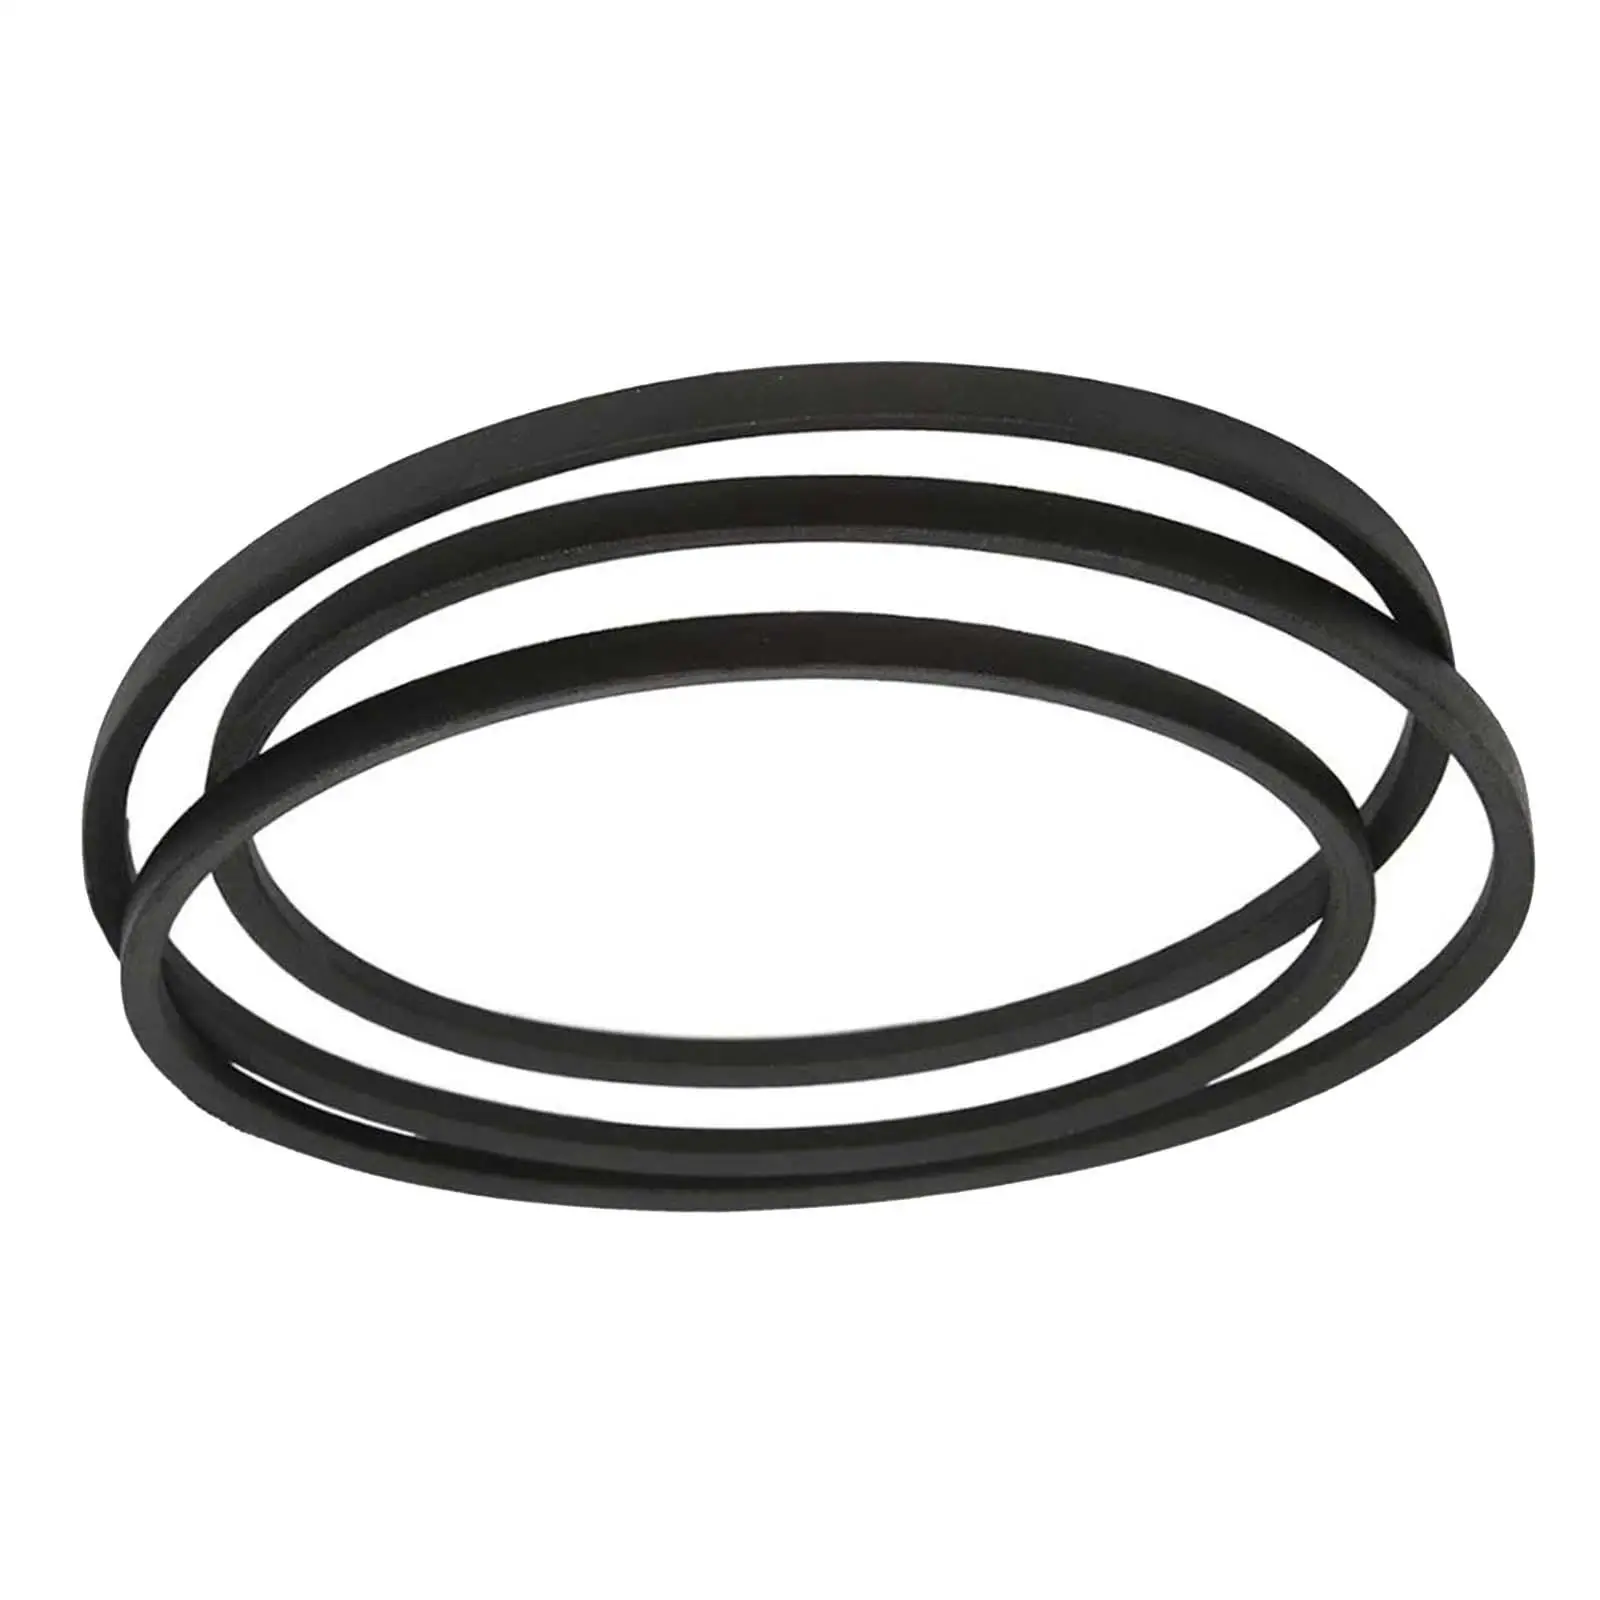 Replacement deck Belt 532197253 197253 429636 Durable for Poulan 1/2